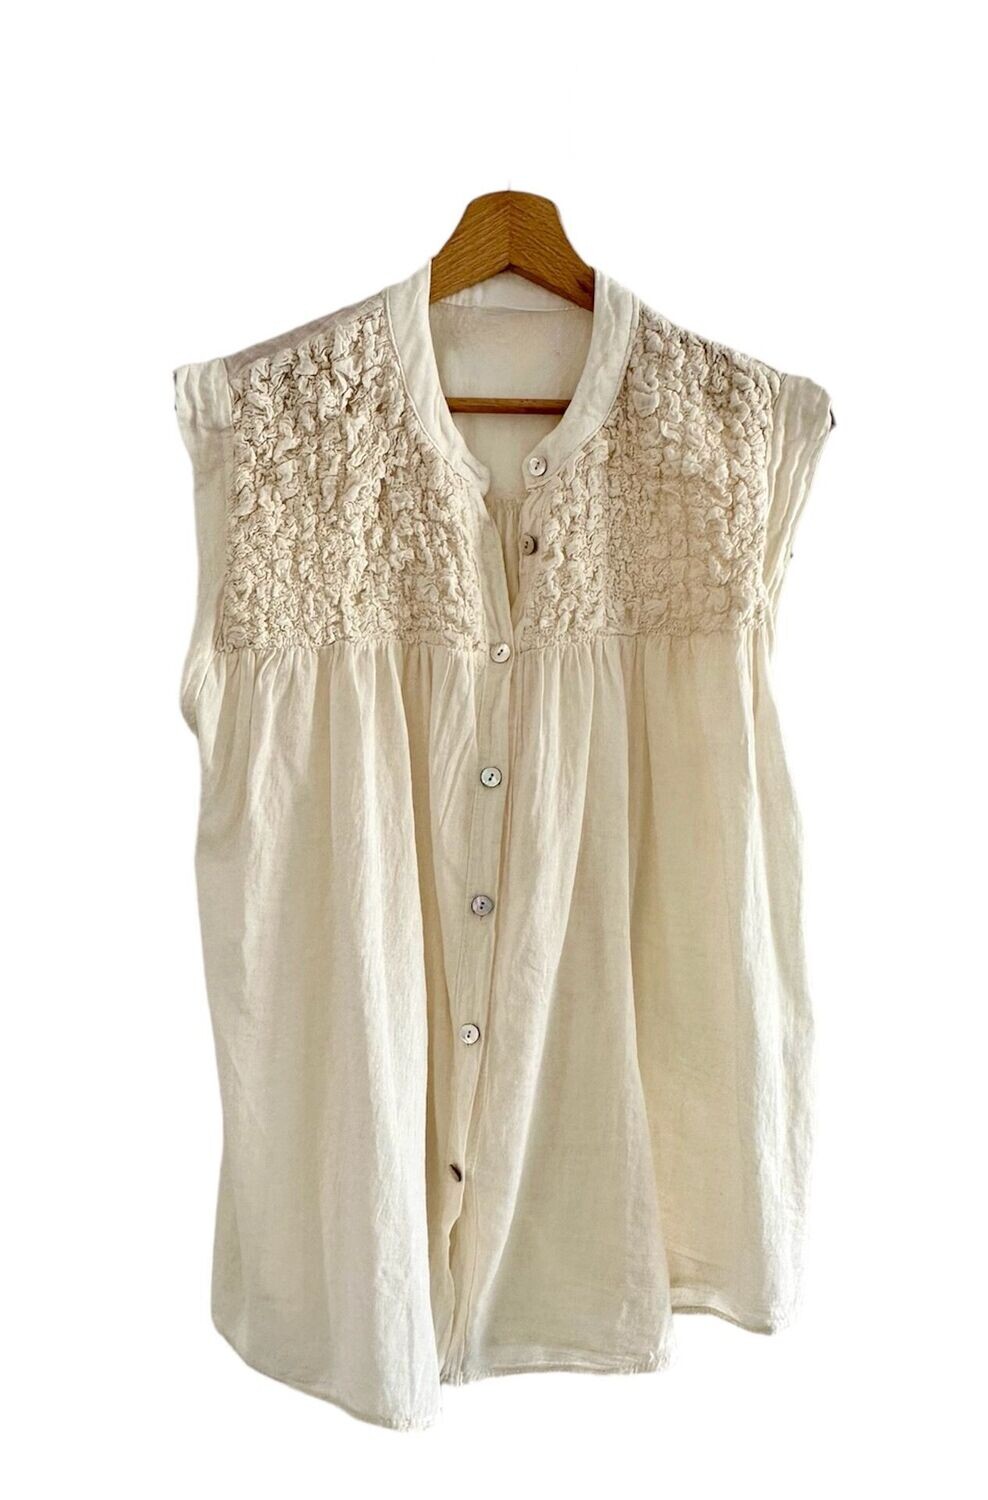 Chemise Froufrou